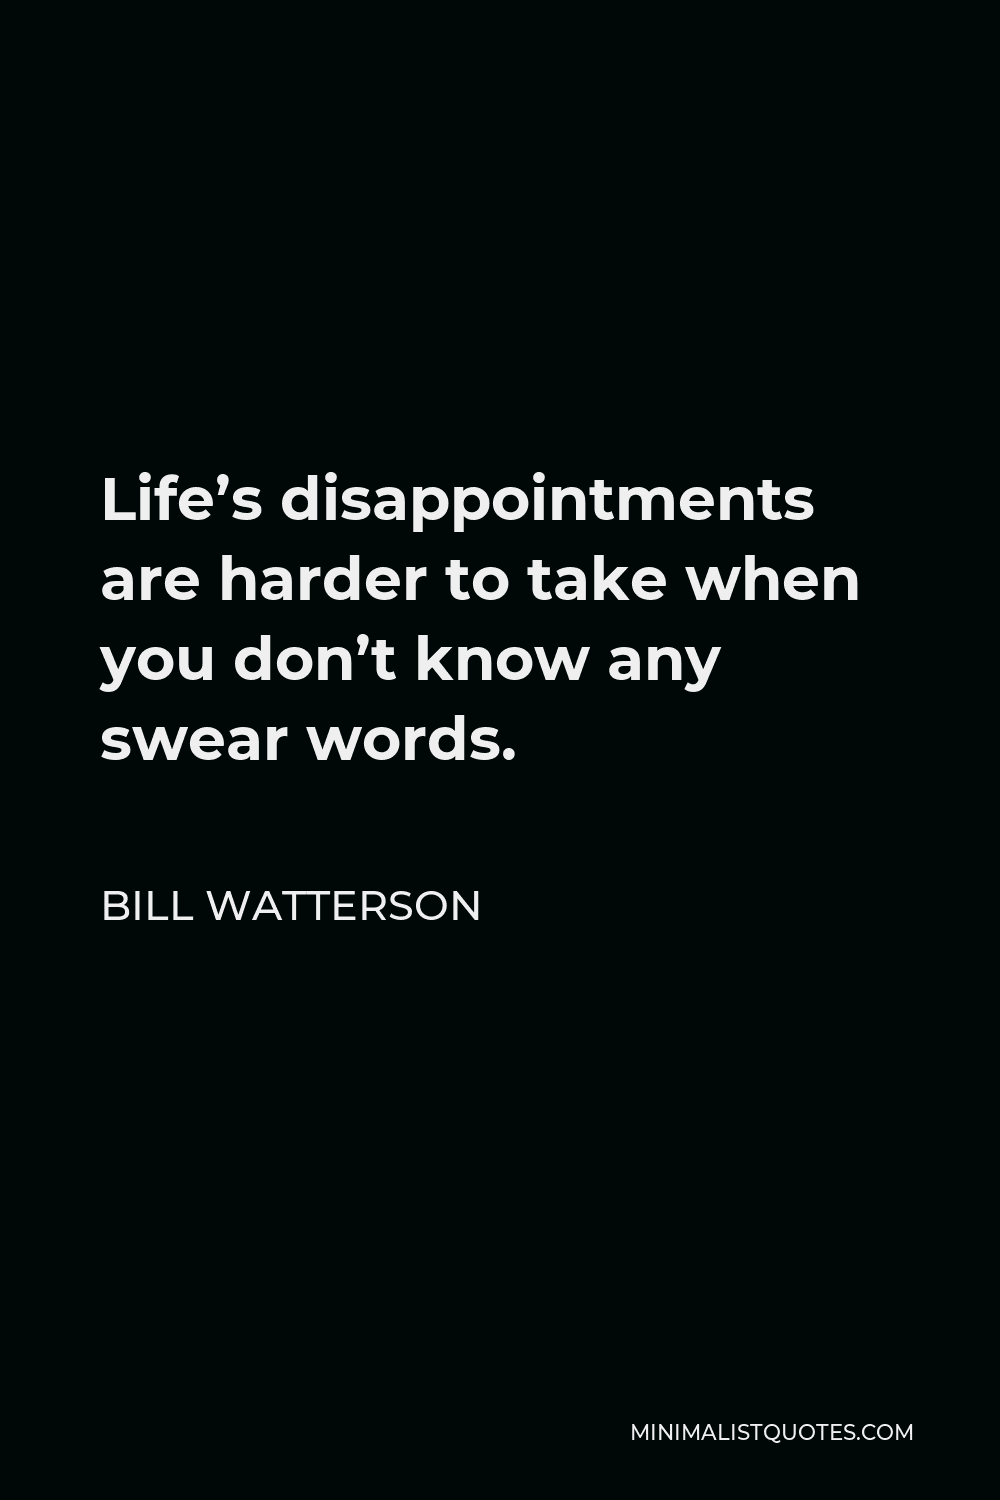 Bill Watterson Quote - Life’s disappointments are harder to take when you don’t know any swear words.